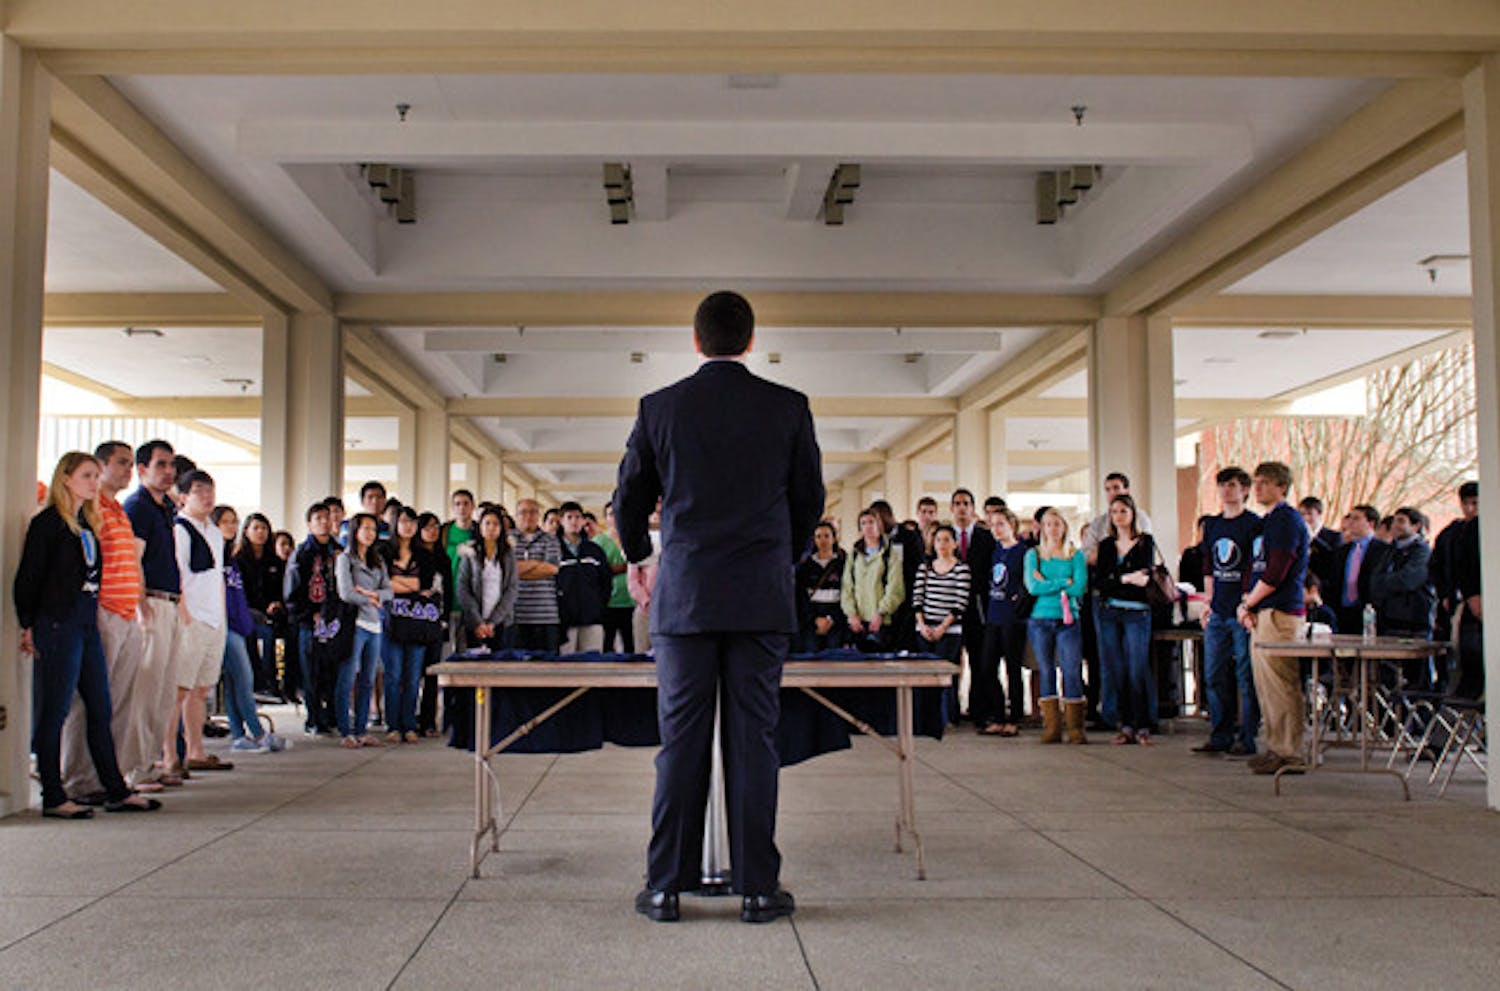 Student Senate President Ben Meyers formally announces his candidacy for Student Body president to a crowd of Unite Party members Jan 25, 2011 at the Reitz Union Colonnade.